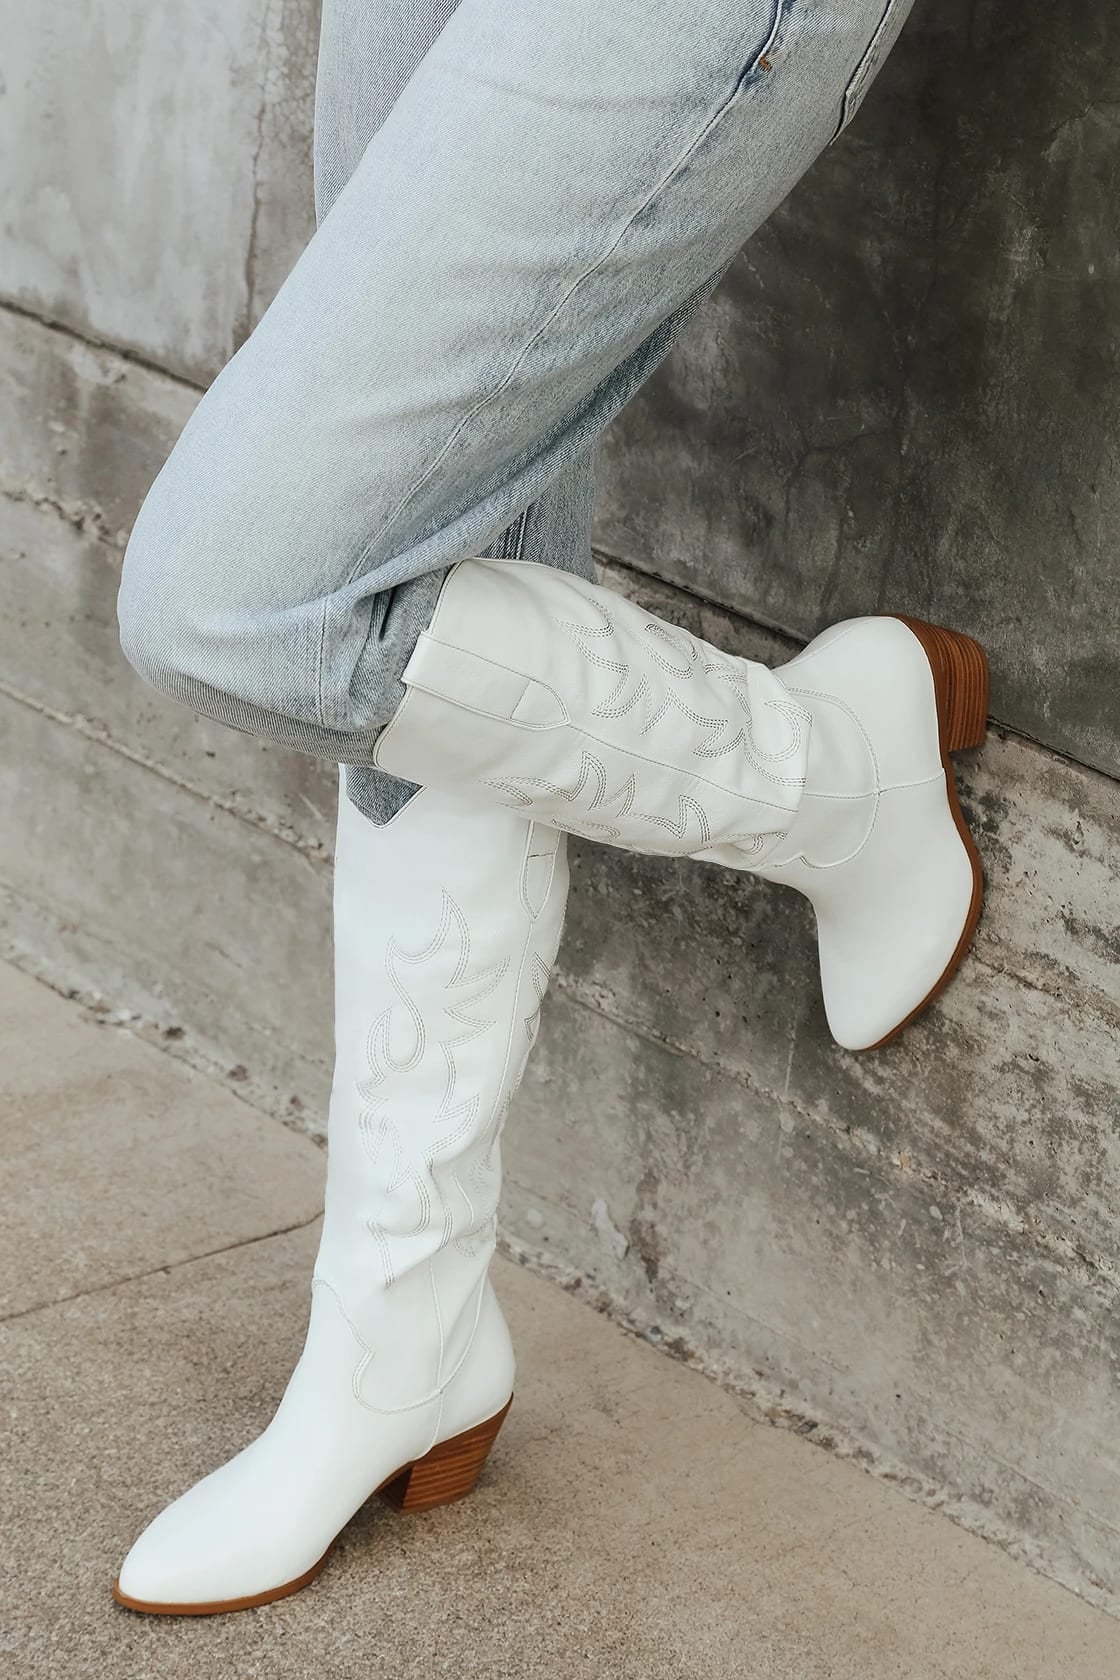 Model wearing knee high white cowboy boots with wooden heel on pavement